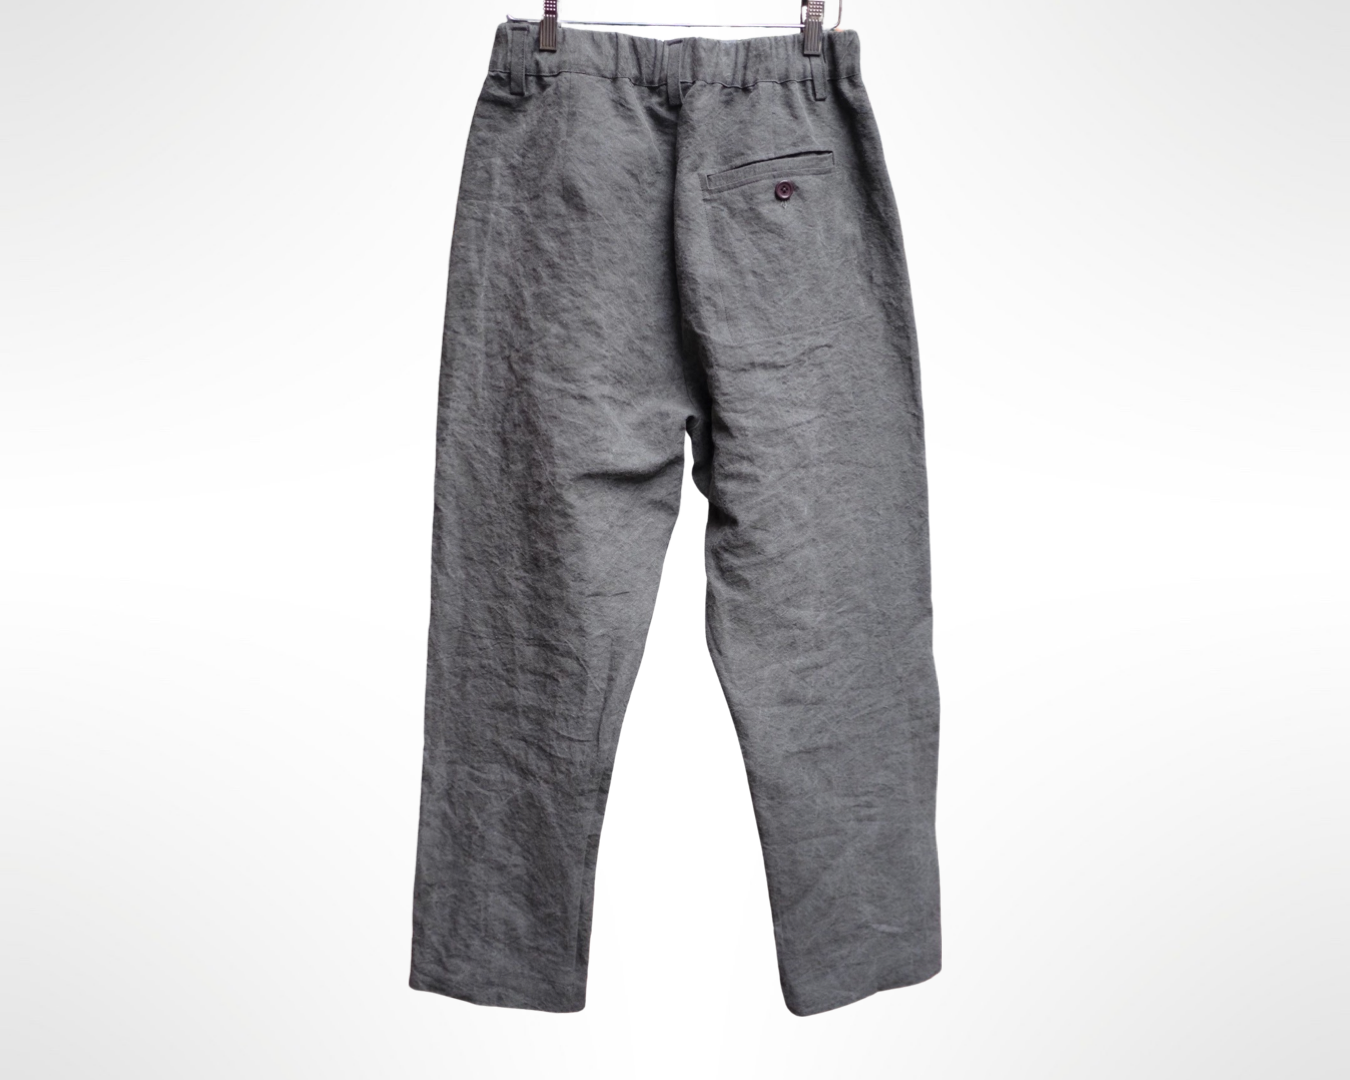 work pants in charcoal dyed paper/linen